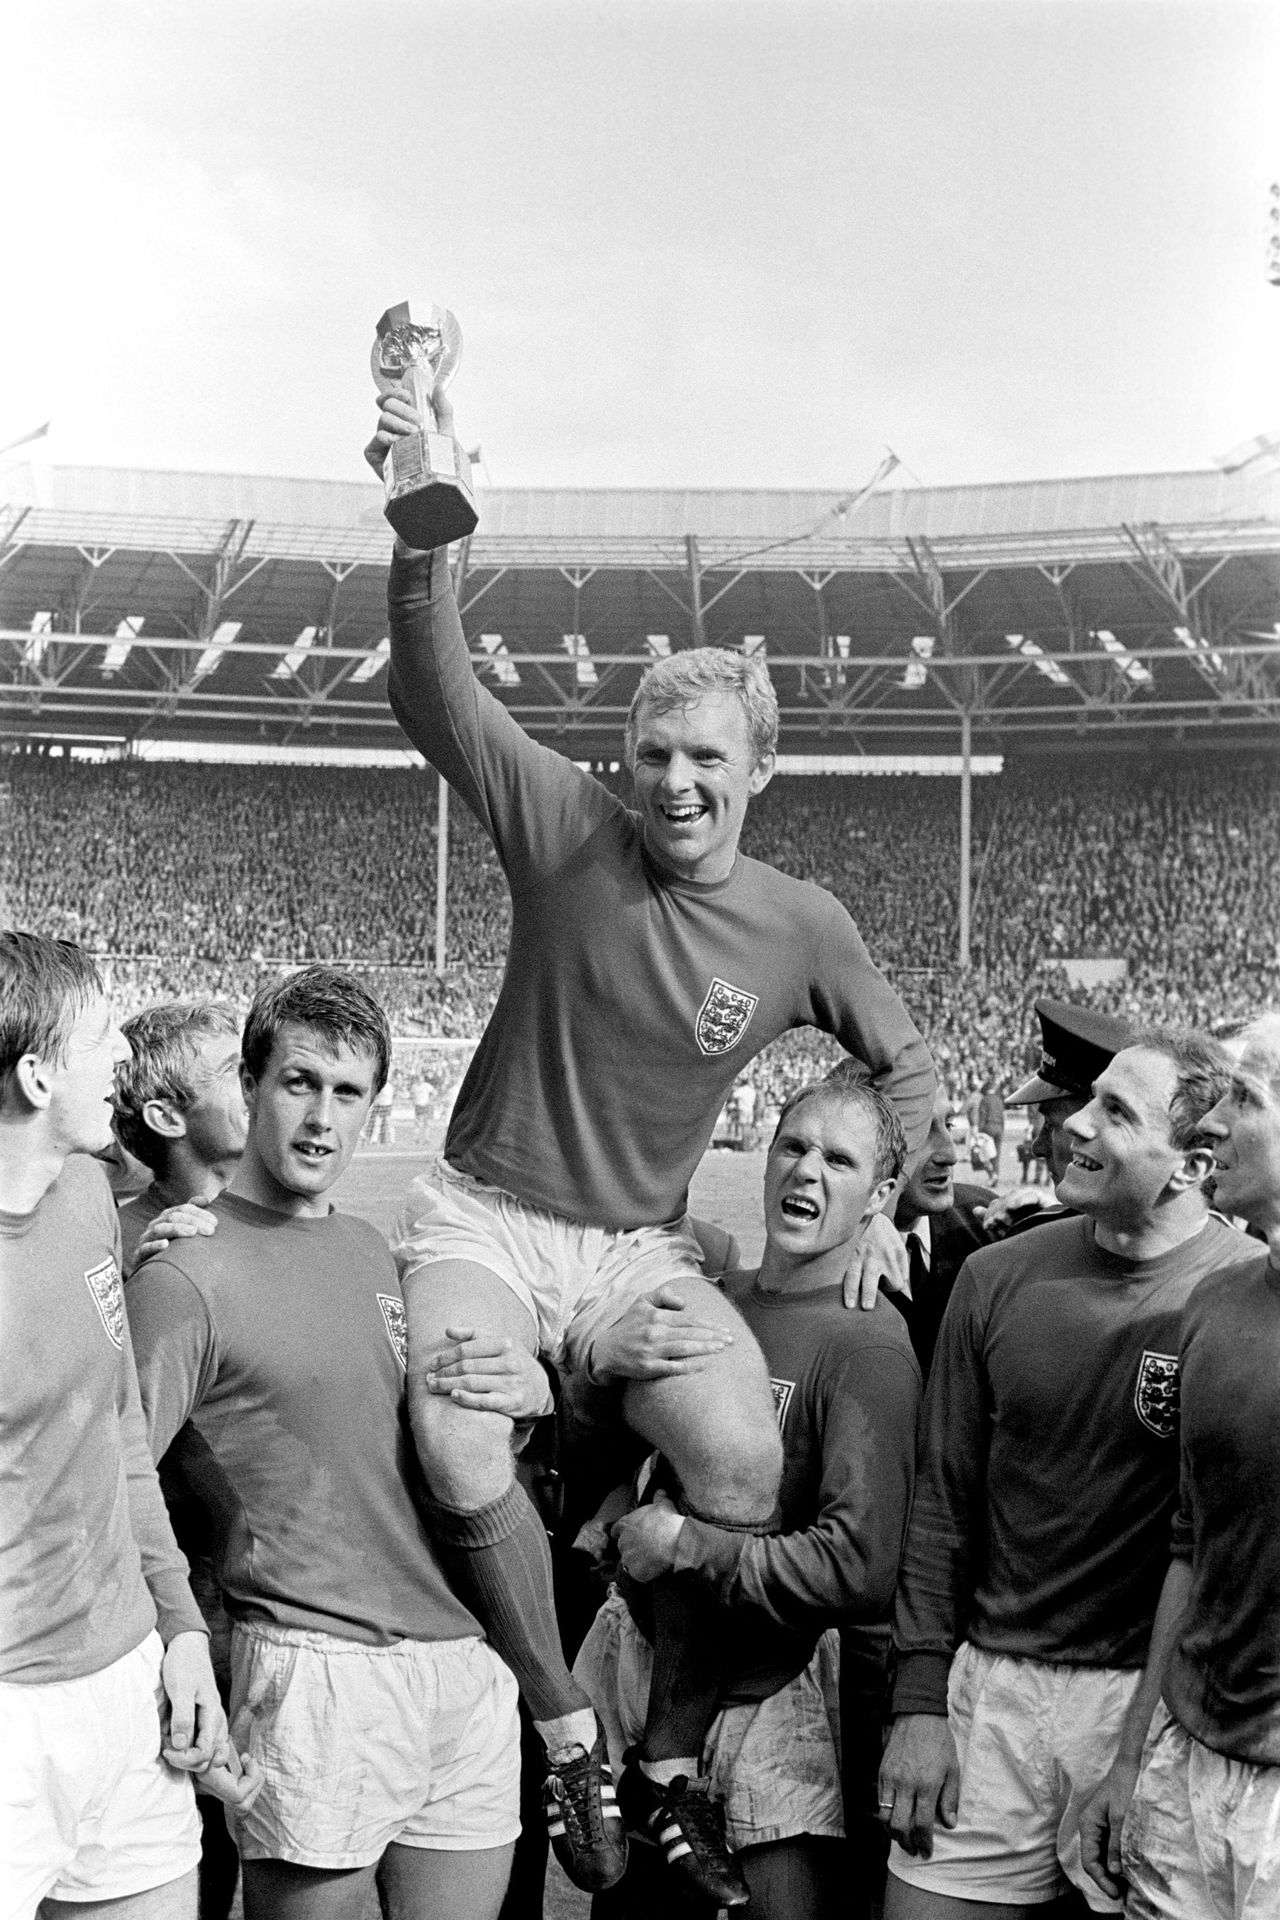 England's triumphant 1966 World Cup win